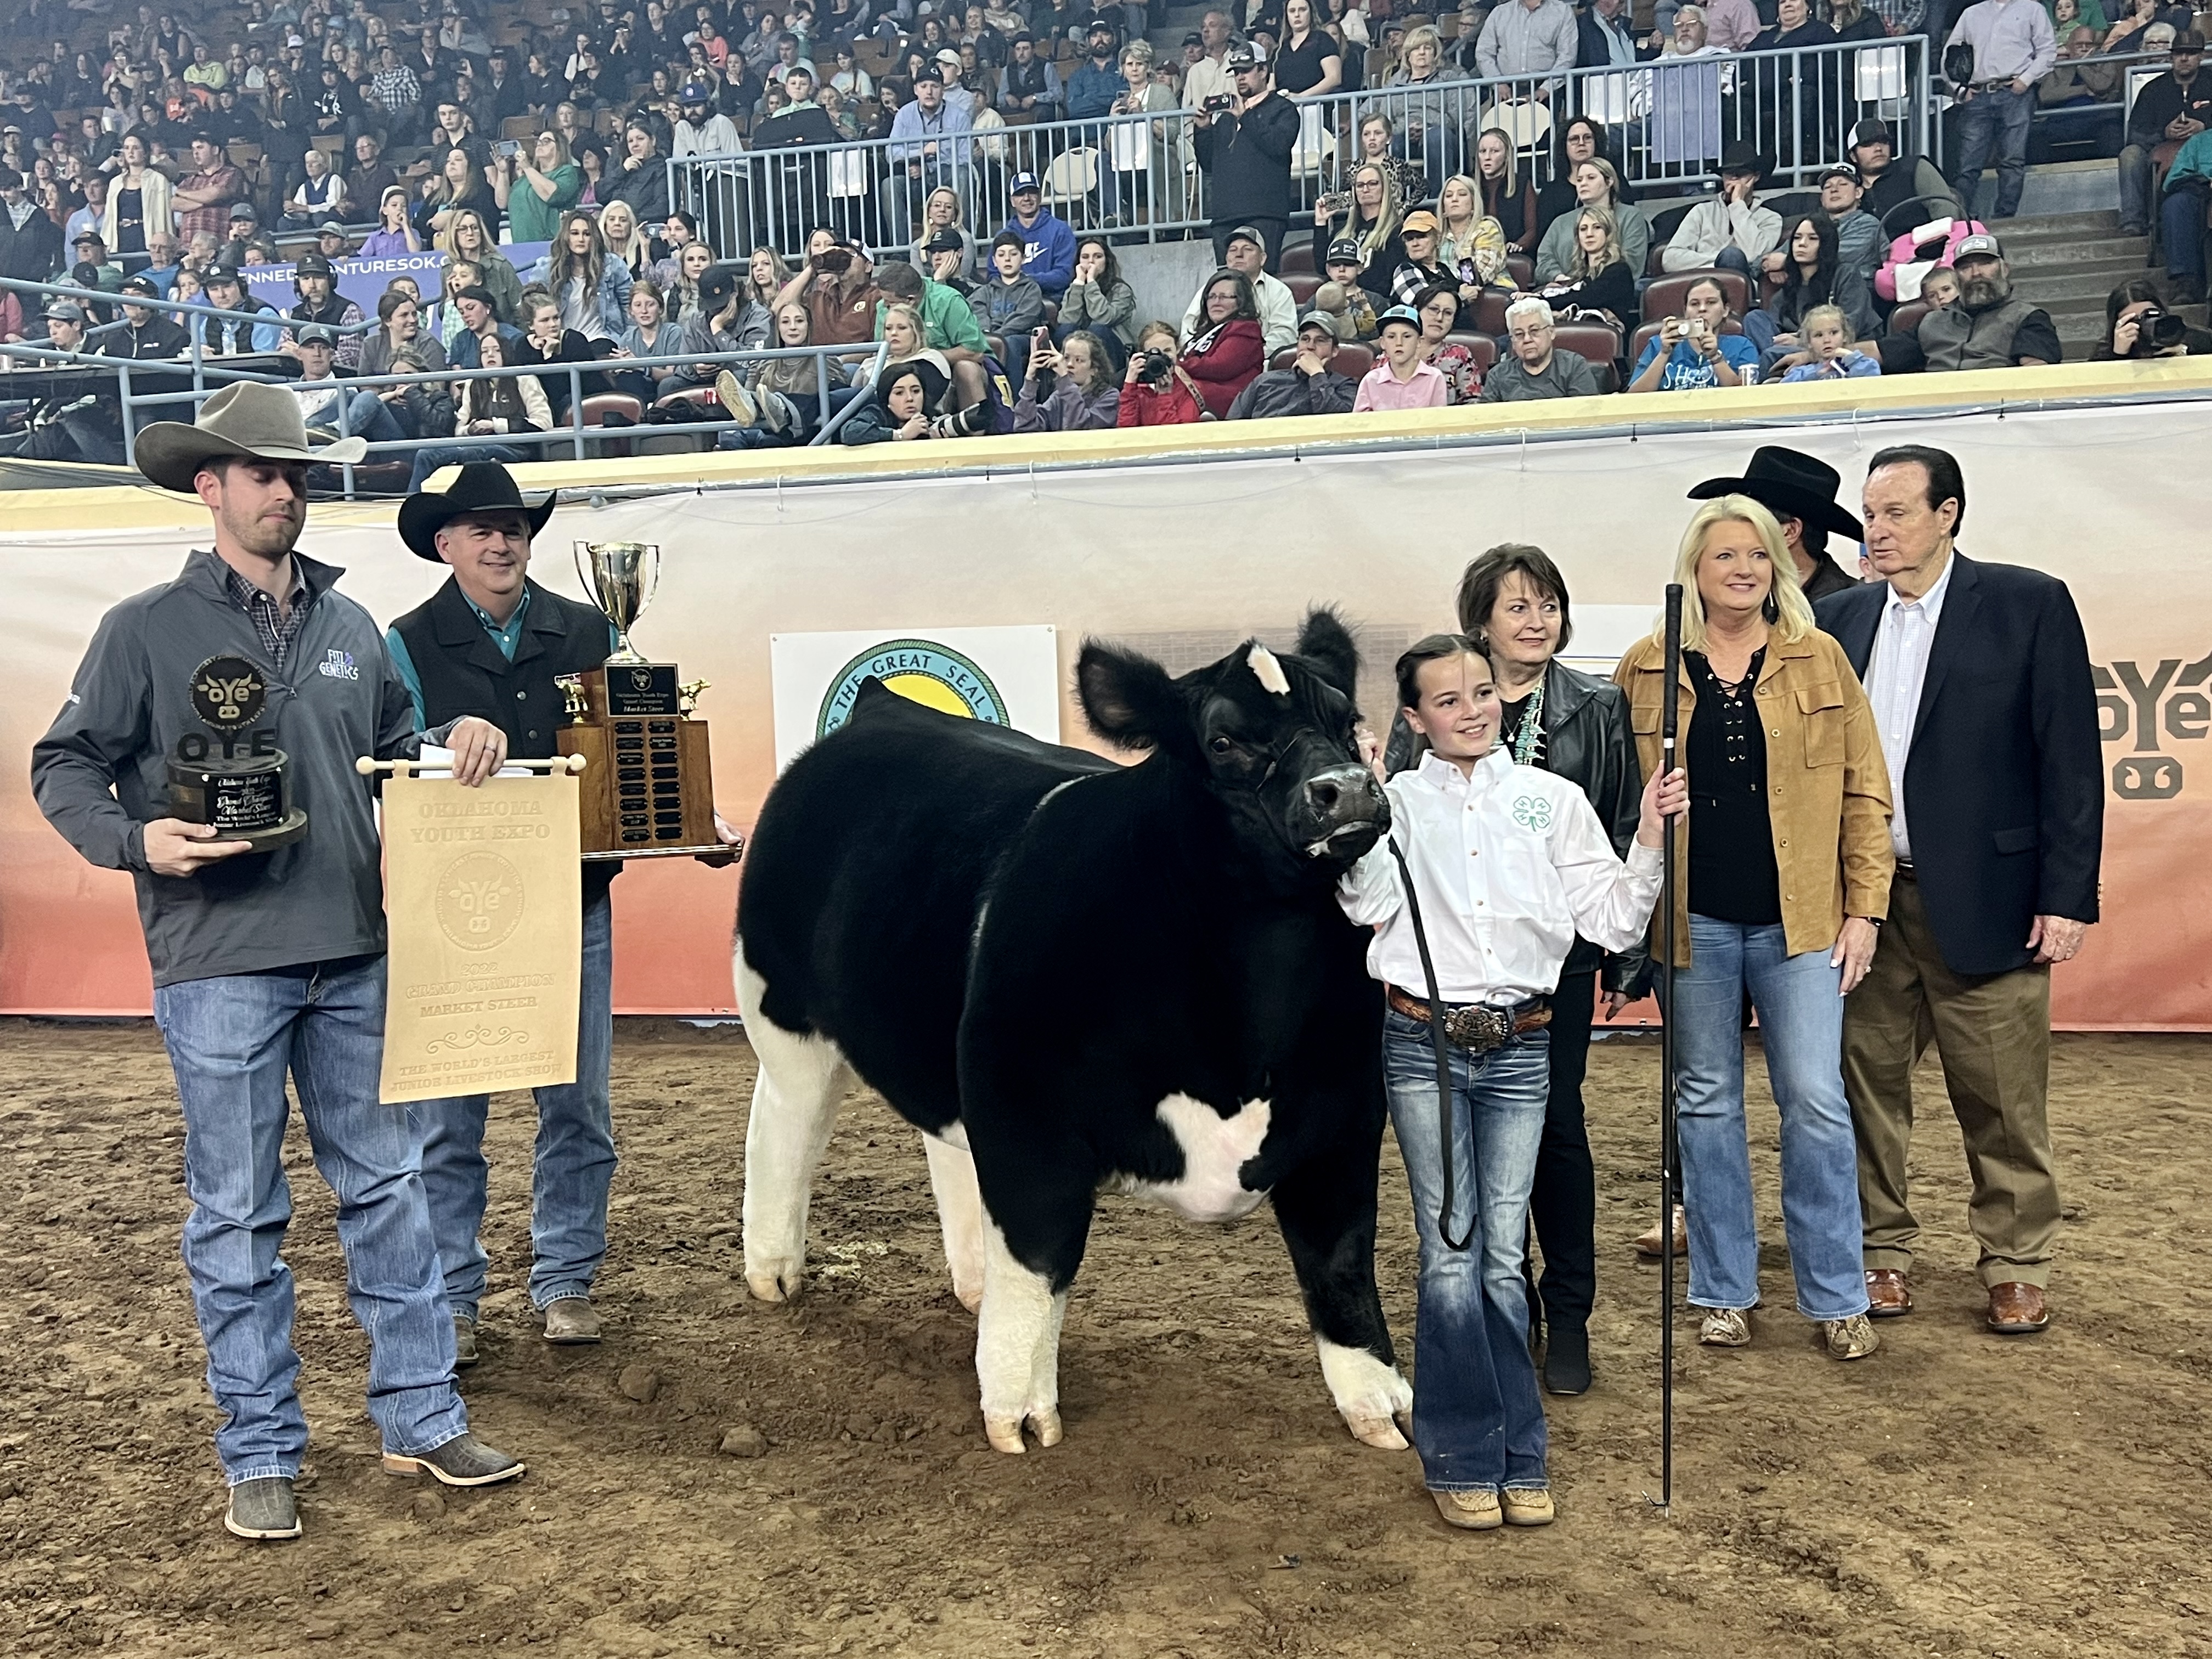 Sadie Wynn of Newcastle 4-H Earns Grand Champion Market Steer Honors with Her Crossbred Steer